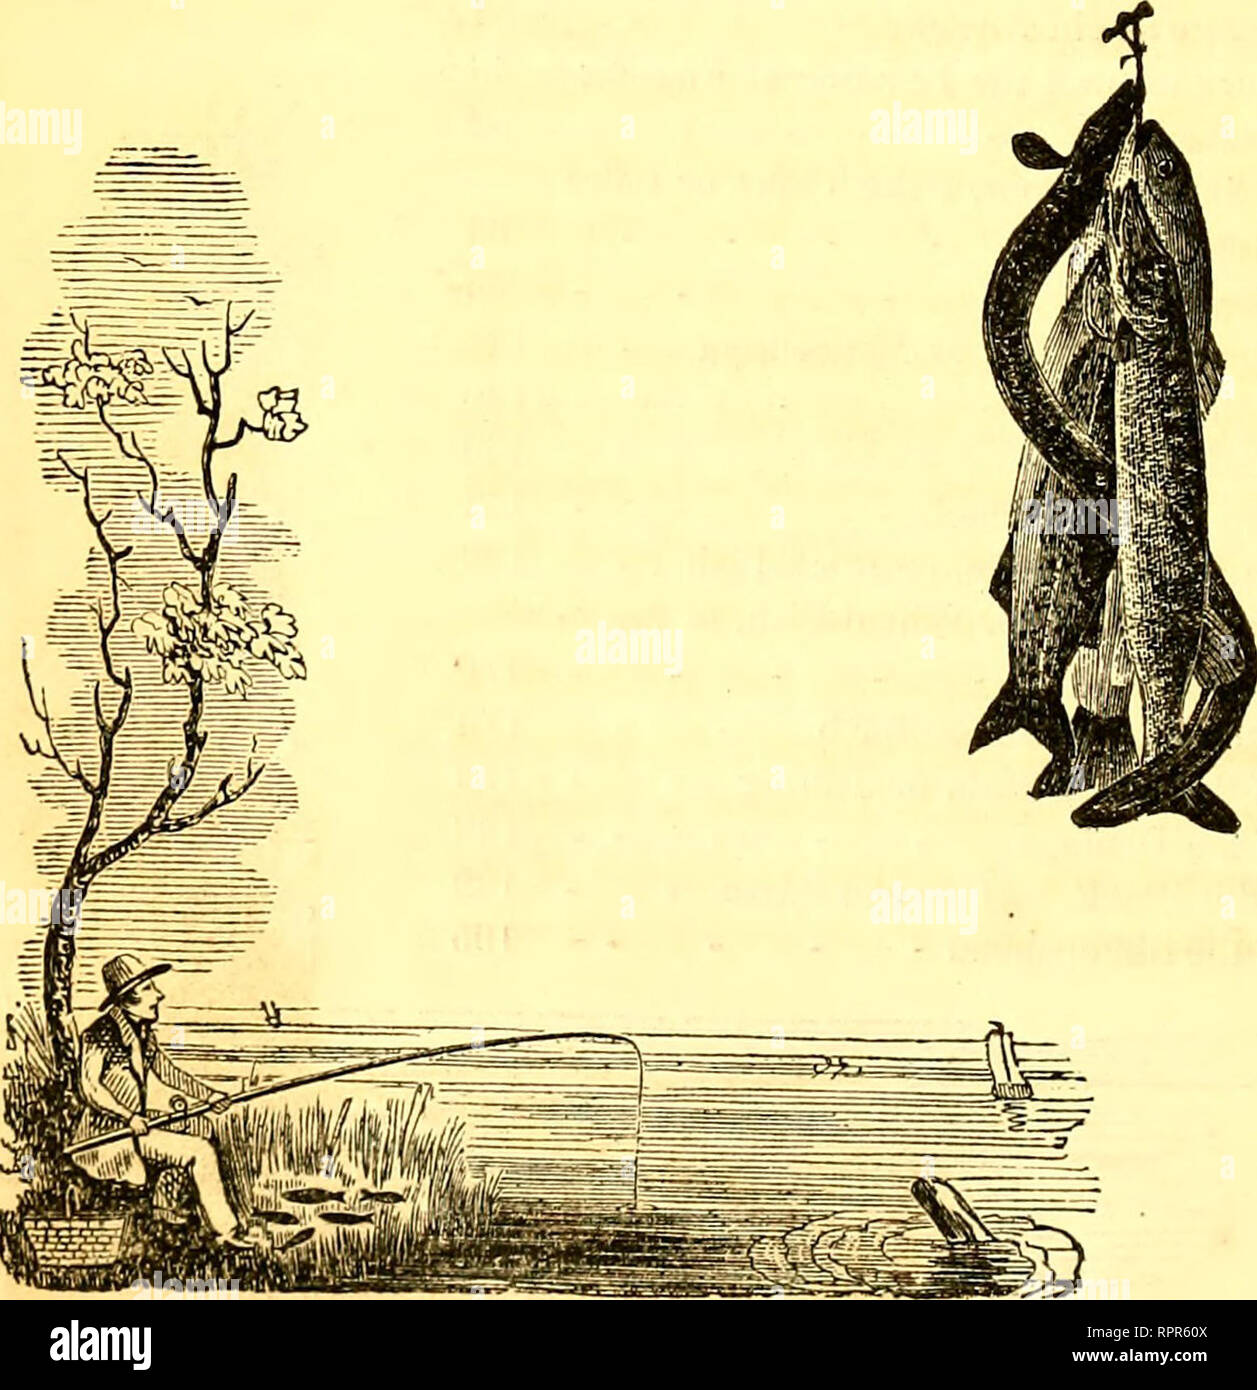 . American angler's guide : or, complete fisher's manual, for the United States: containing the opinions and practices of experienced anglers of both hemispheres ; with the addition of a second part.. Fishing. X CONTENTS. PAGE. Chapter XVII—Of the Cod and Tom-Cod - - 203 Chapter XVIII—Of the Flounder - ... 207 Chapter XIX—Of the Blue-Fish - - - - 210 Chapter XX—Of the Sea-Basse, Porgee, &amp;c. - 214 Chapter XXI—Of some of the other Inhabitants of the Waters 217 The Eel 217 The Chub 218 The Bull-Head, Sucker, Bream, Roach, Dace, Bleak, Gudgeon and Herring 219 The White-Fish and Cat-Fish - 220  Stock Photo